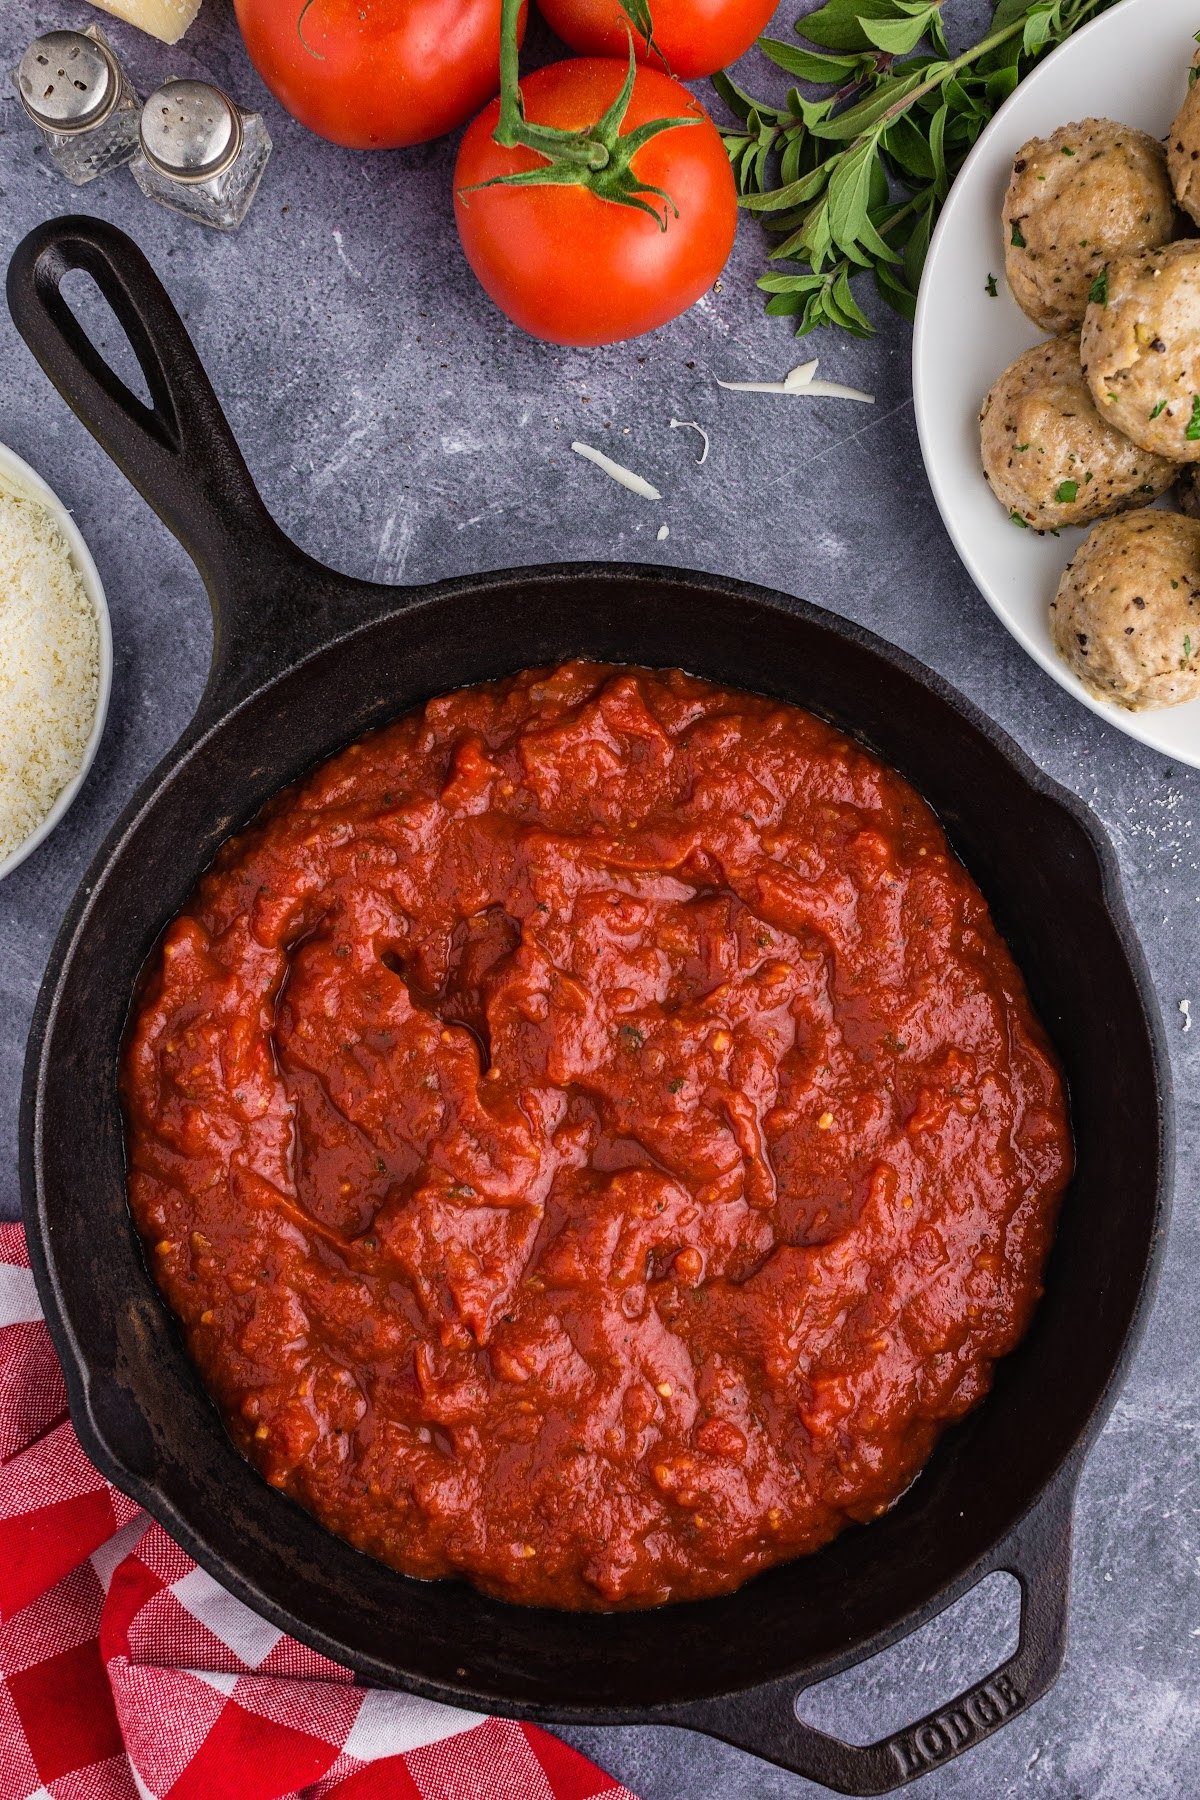 Marinara sauce in a skillet being warmed up.